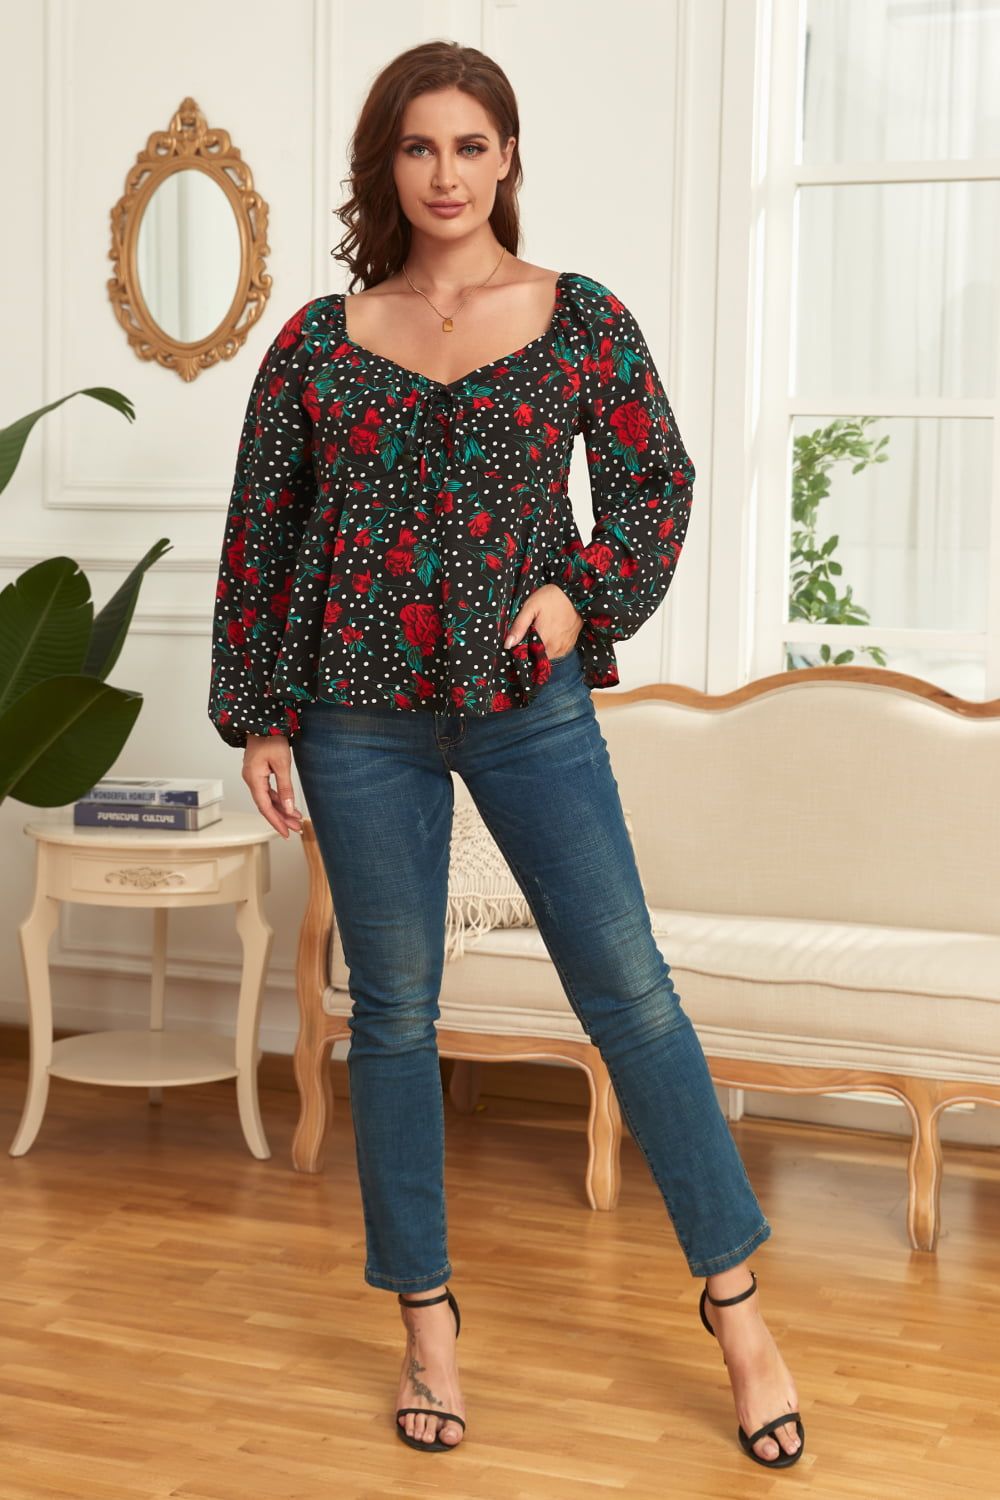 Melo Apparel Plus Size Floral Balloon Sleeve Blouse.